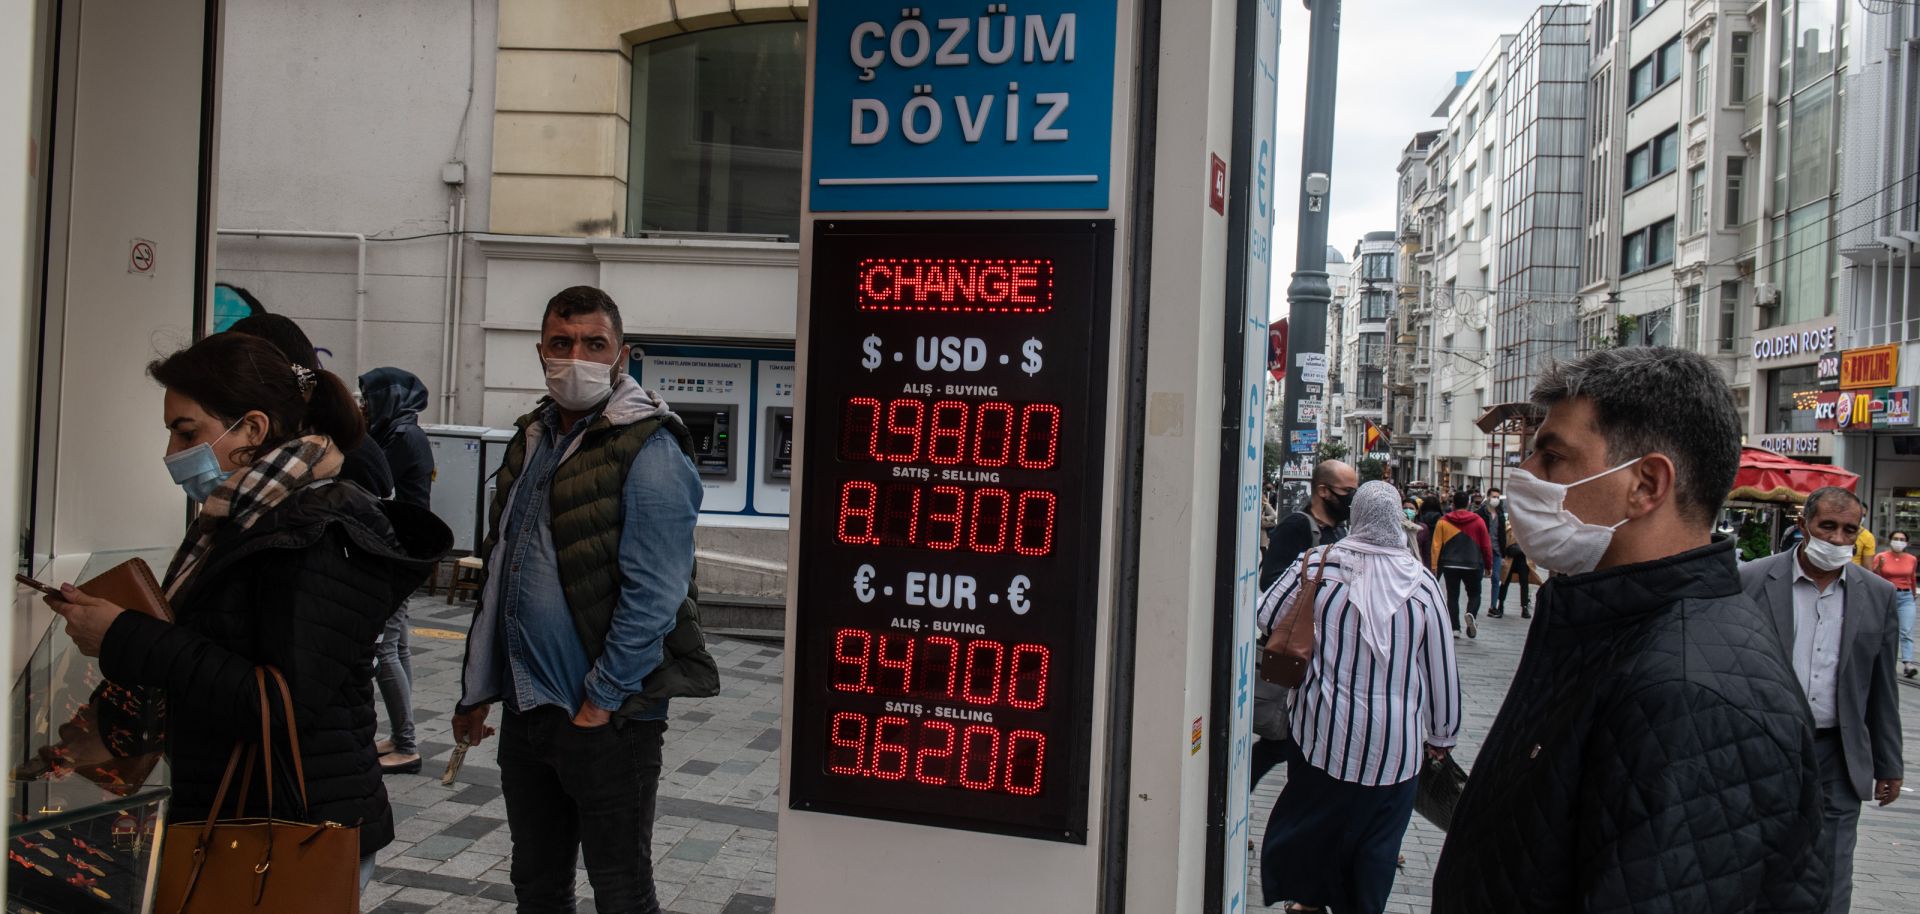 A currency exchange shop on Nov. 9, 2020, in Istanbul.